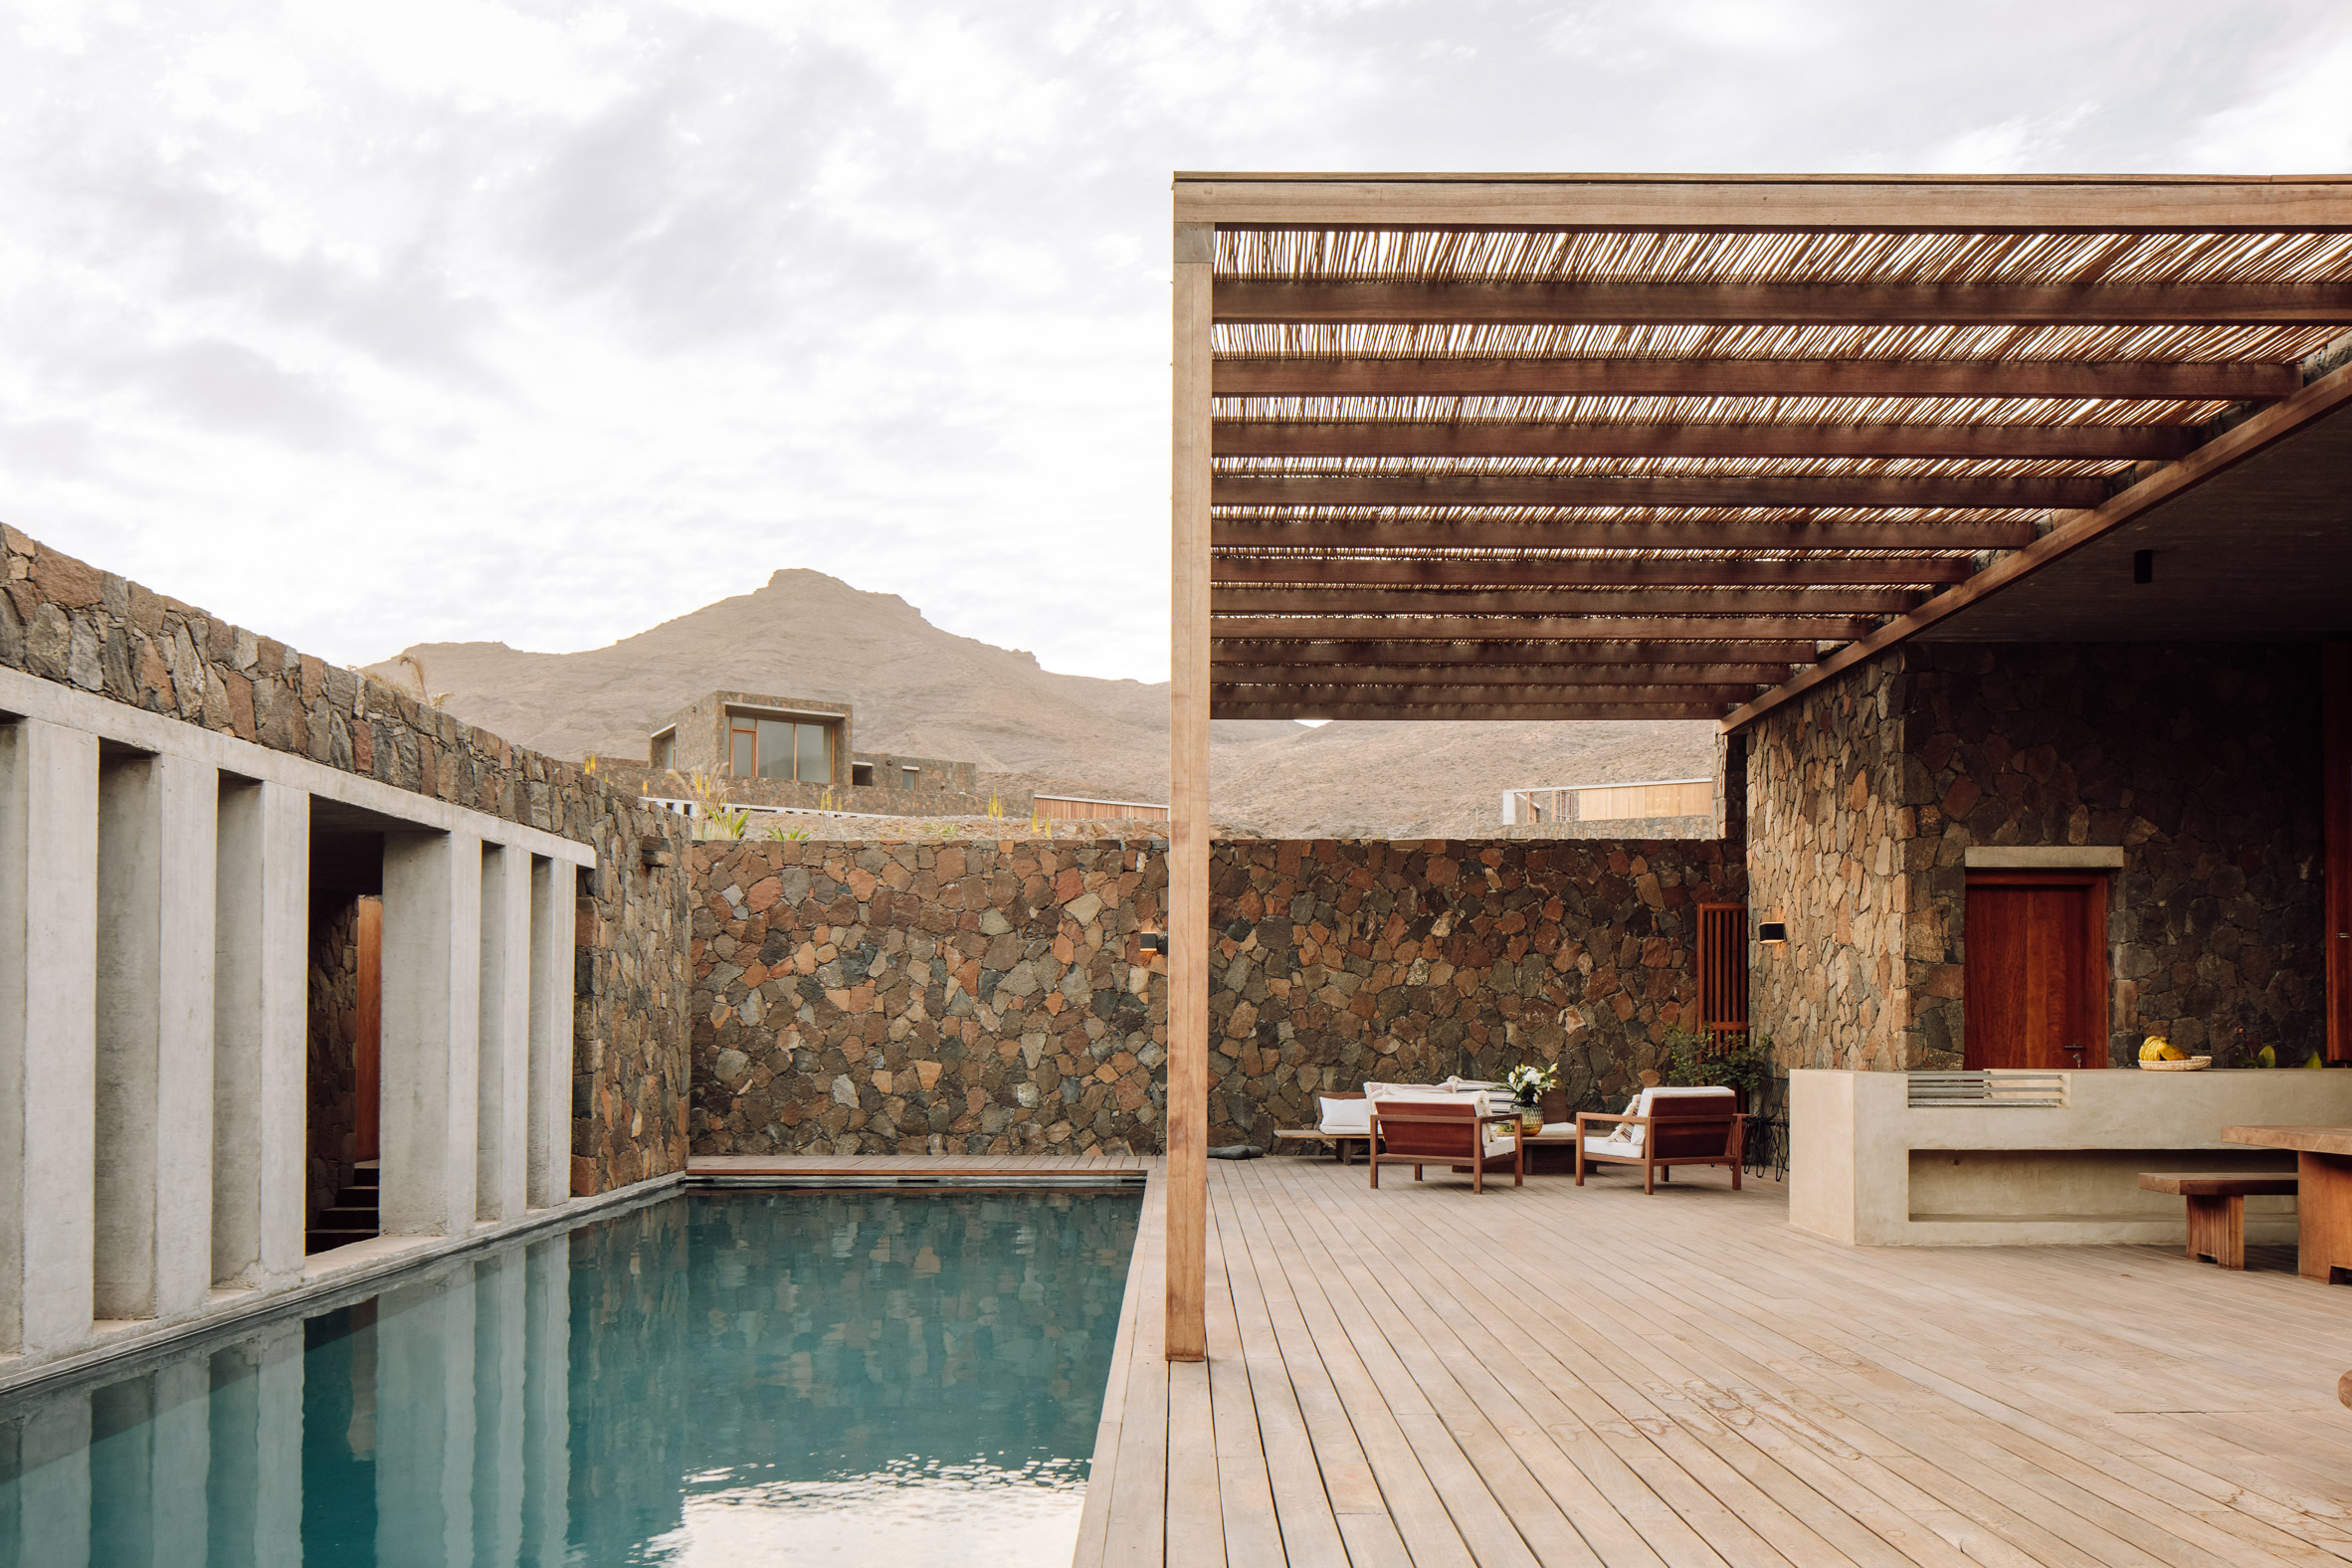 Barefoot Luxury hotel in Cape Verde by Polo Architects and Going East